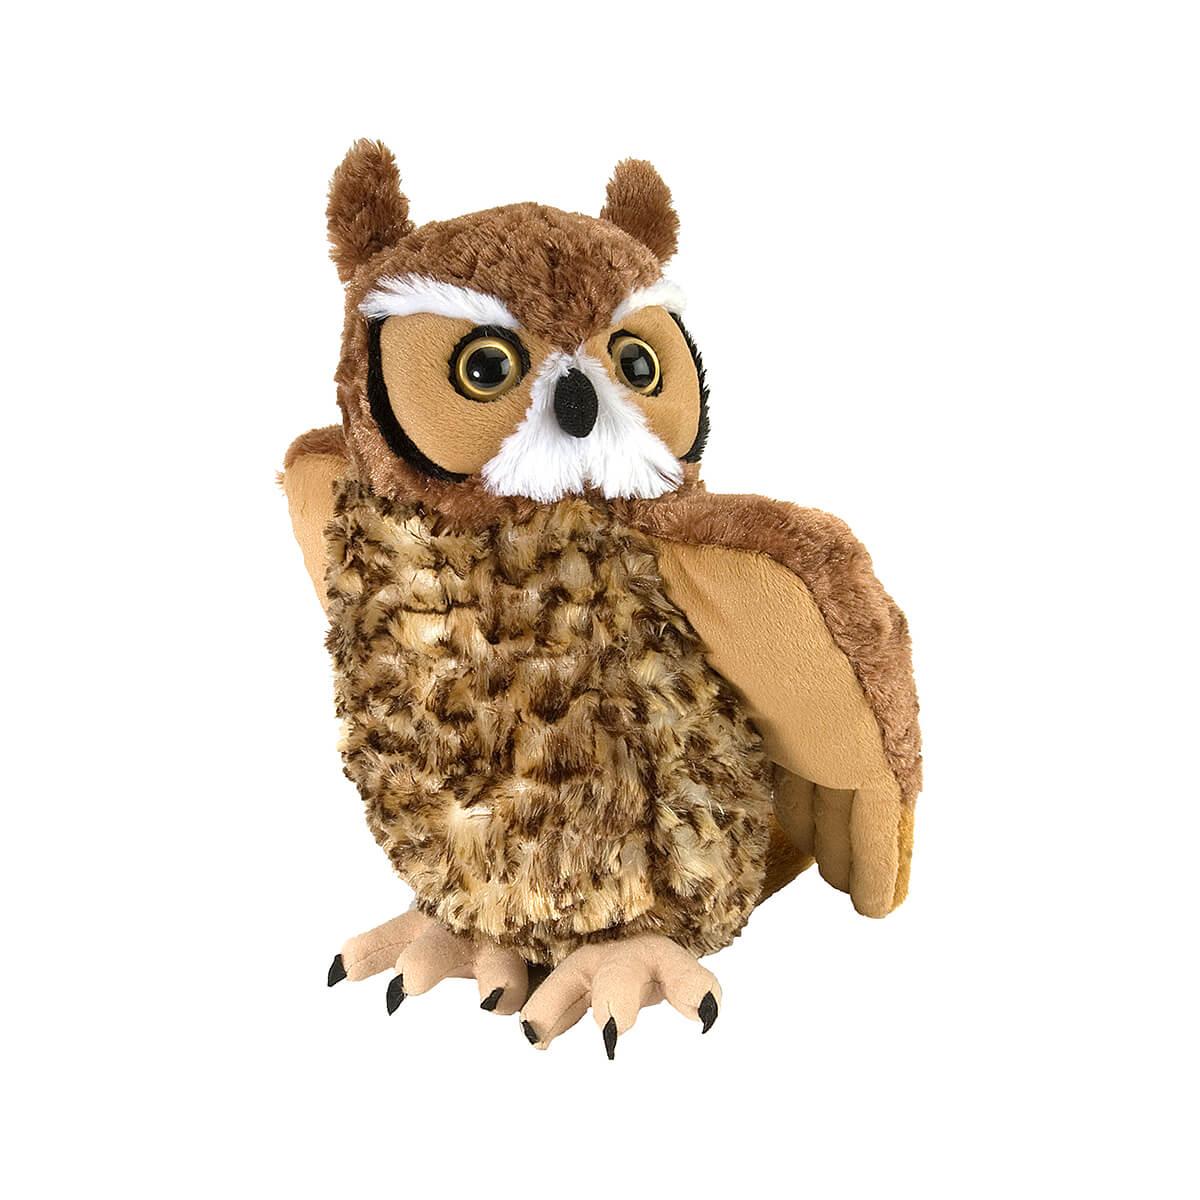  Great Horned Owl Plush Toy